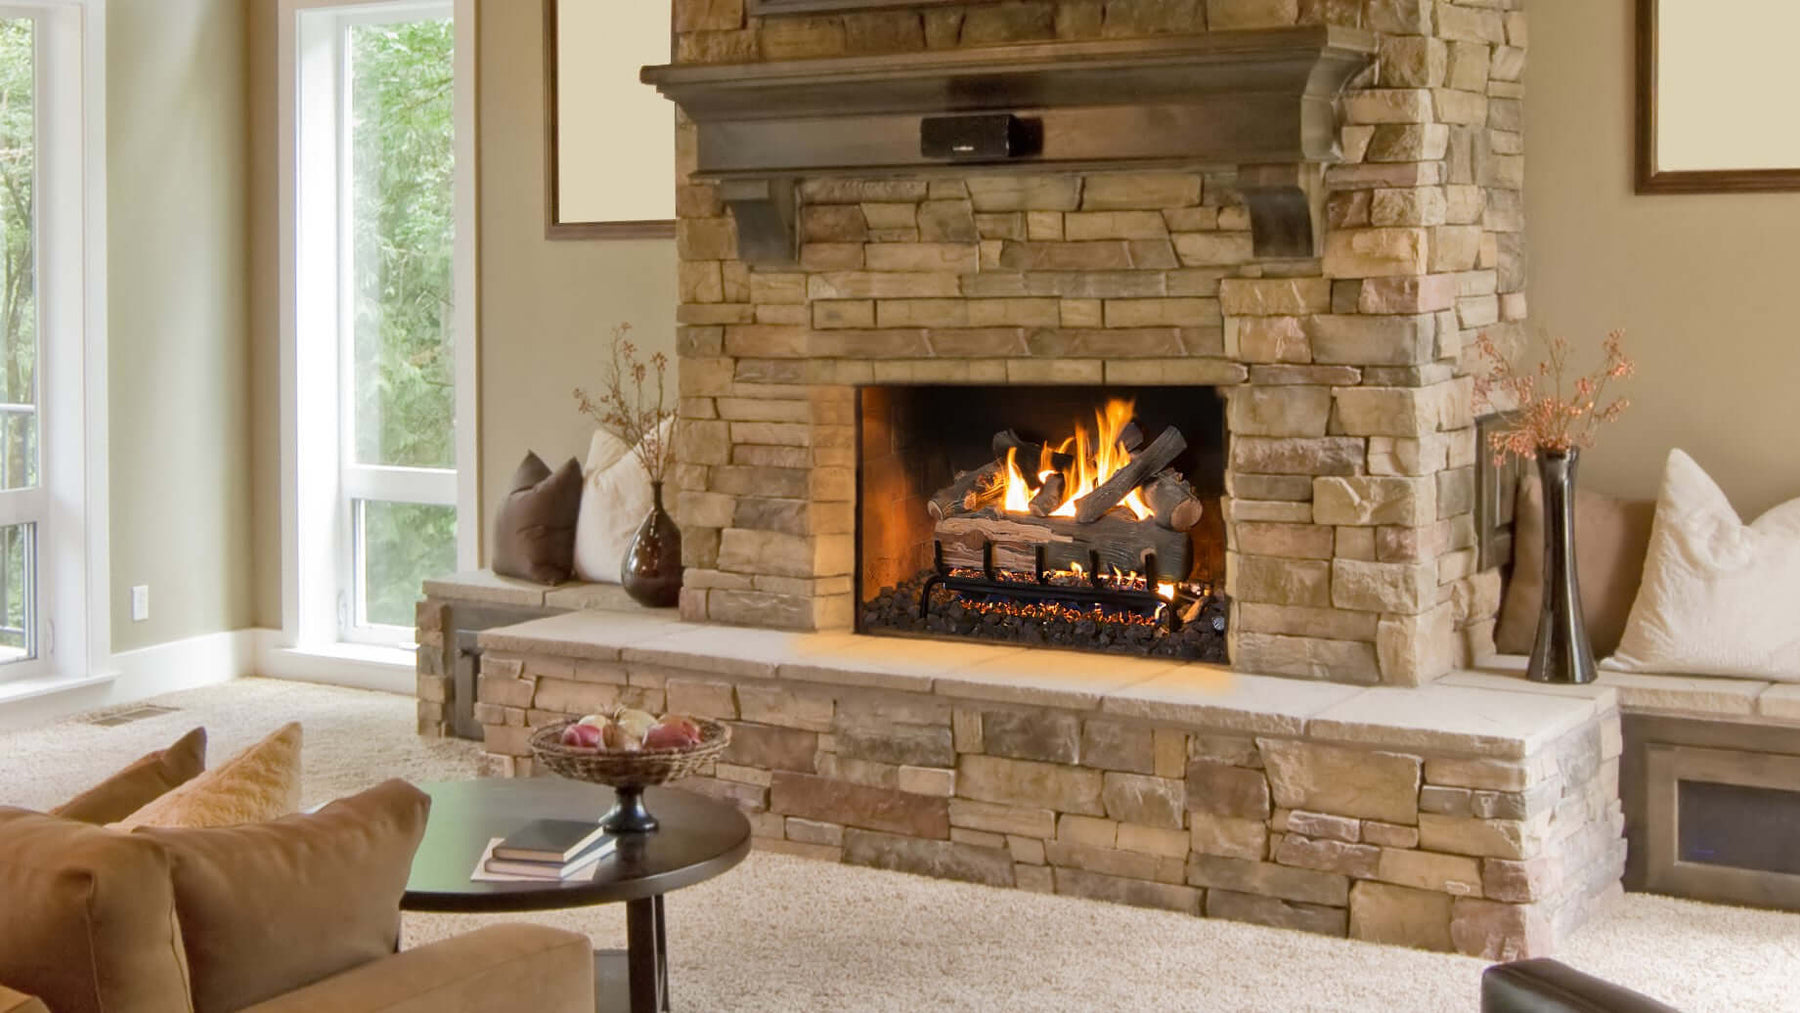 Making the Switch: How to Convert Wood-Burning Fireplace to Gas-Burning Fireplace